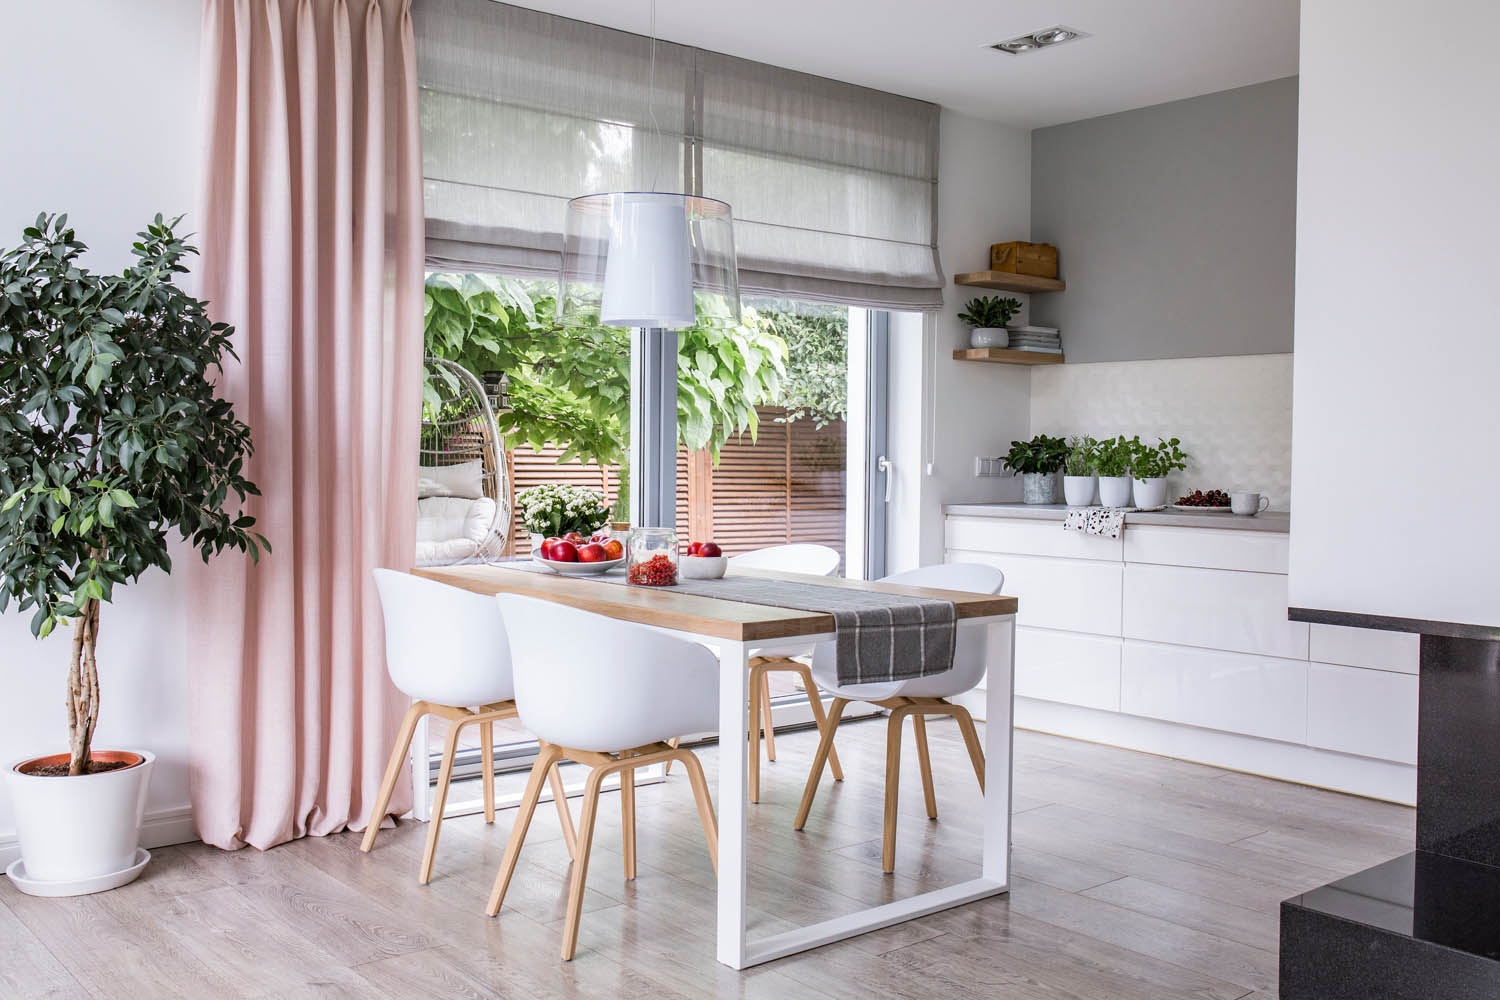 Gray roman shades and a pink curtain on big, glass windows in a